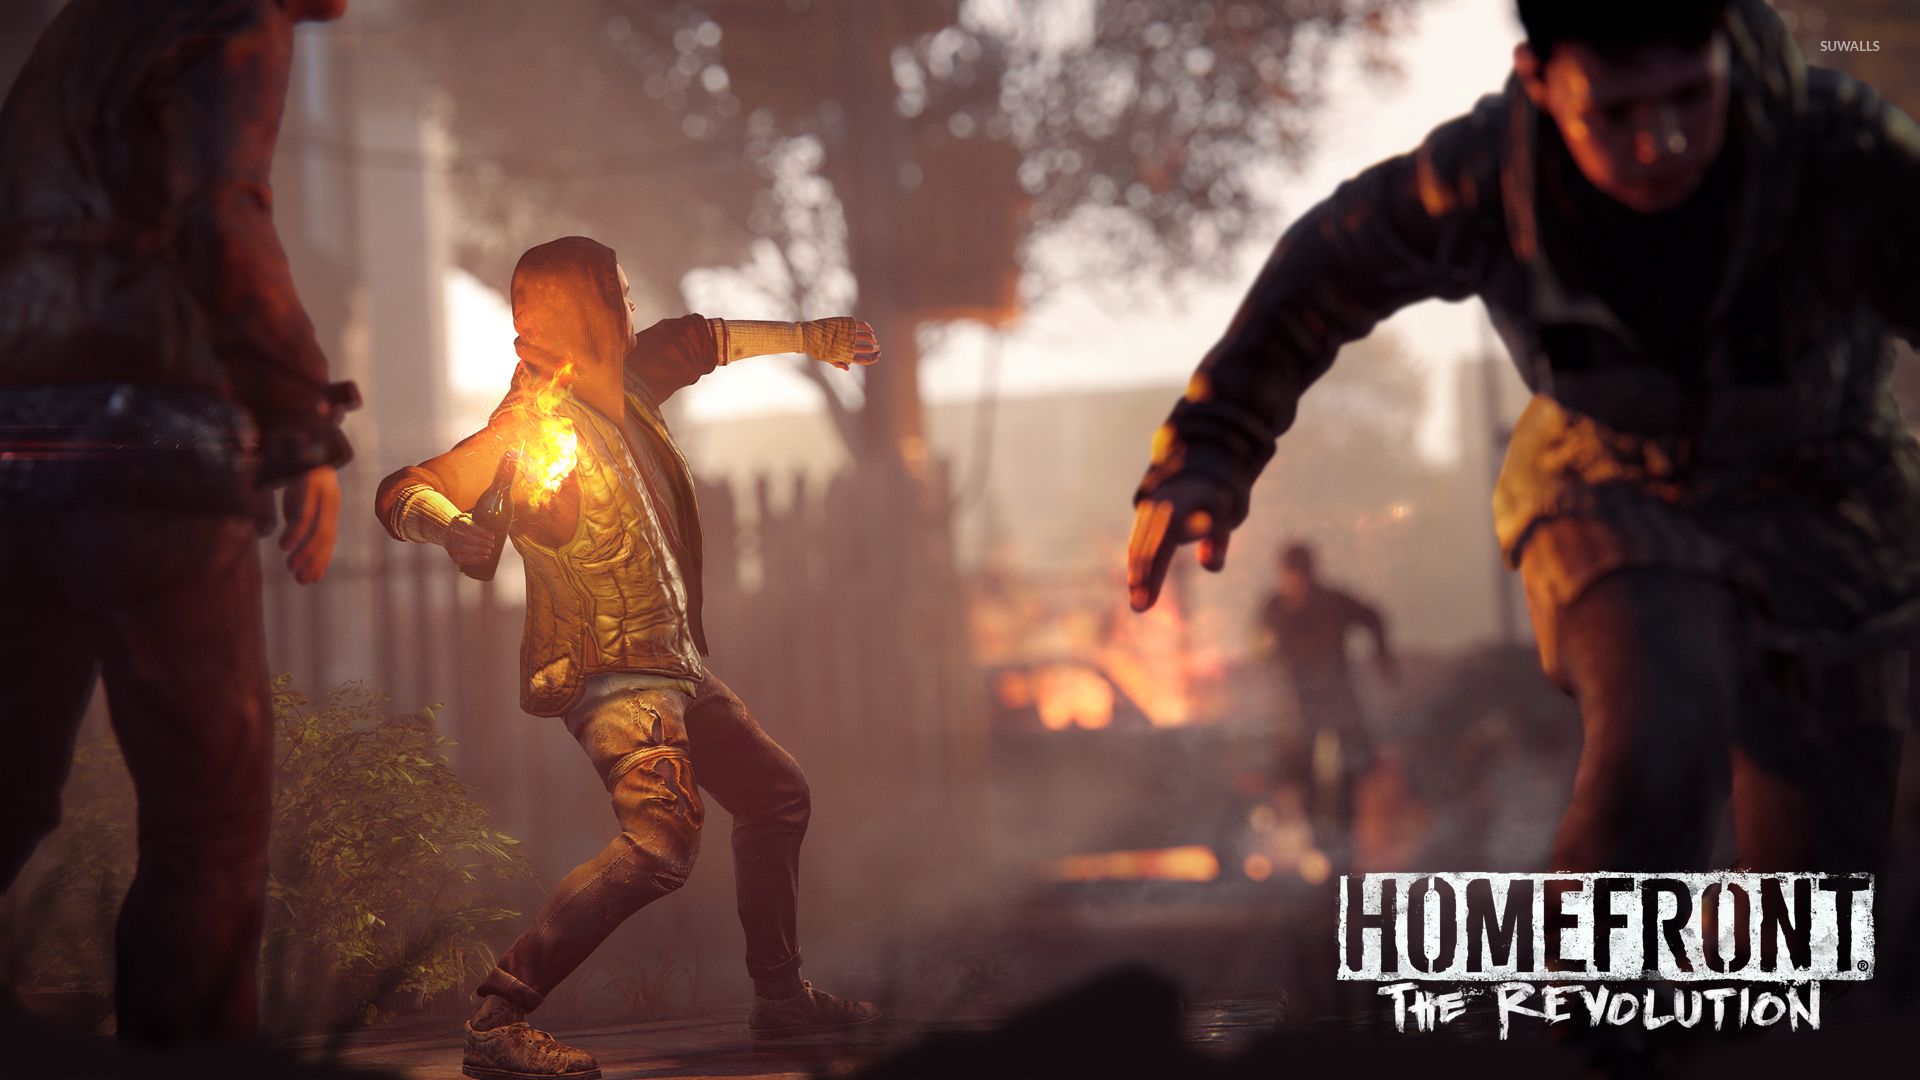 Man with a molotov in Homefront: The Revolution wallpaper wallpaper